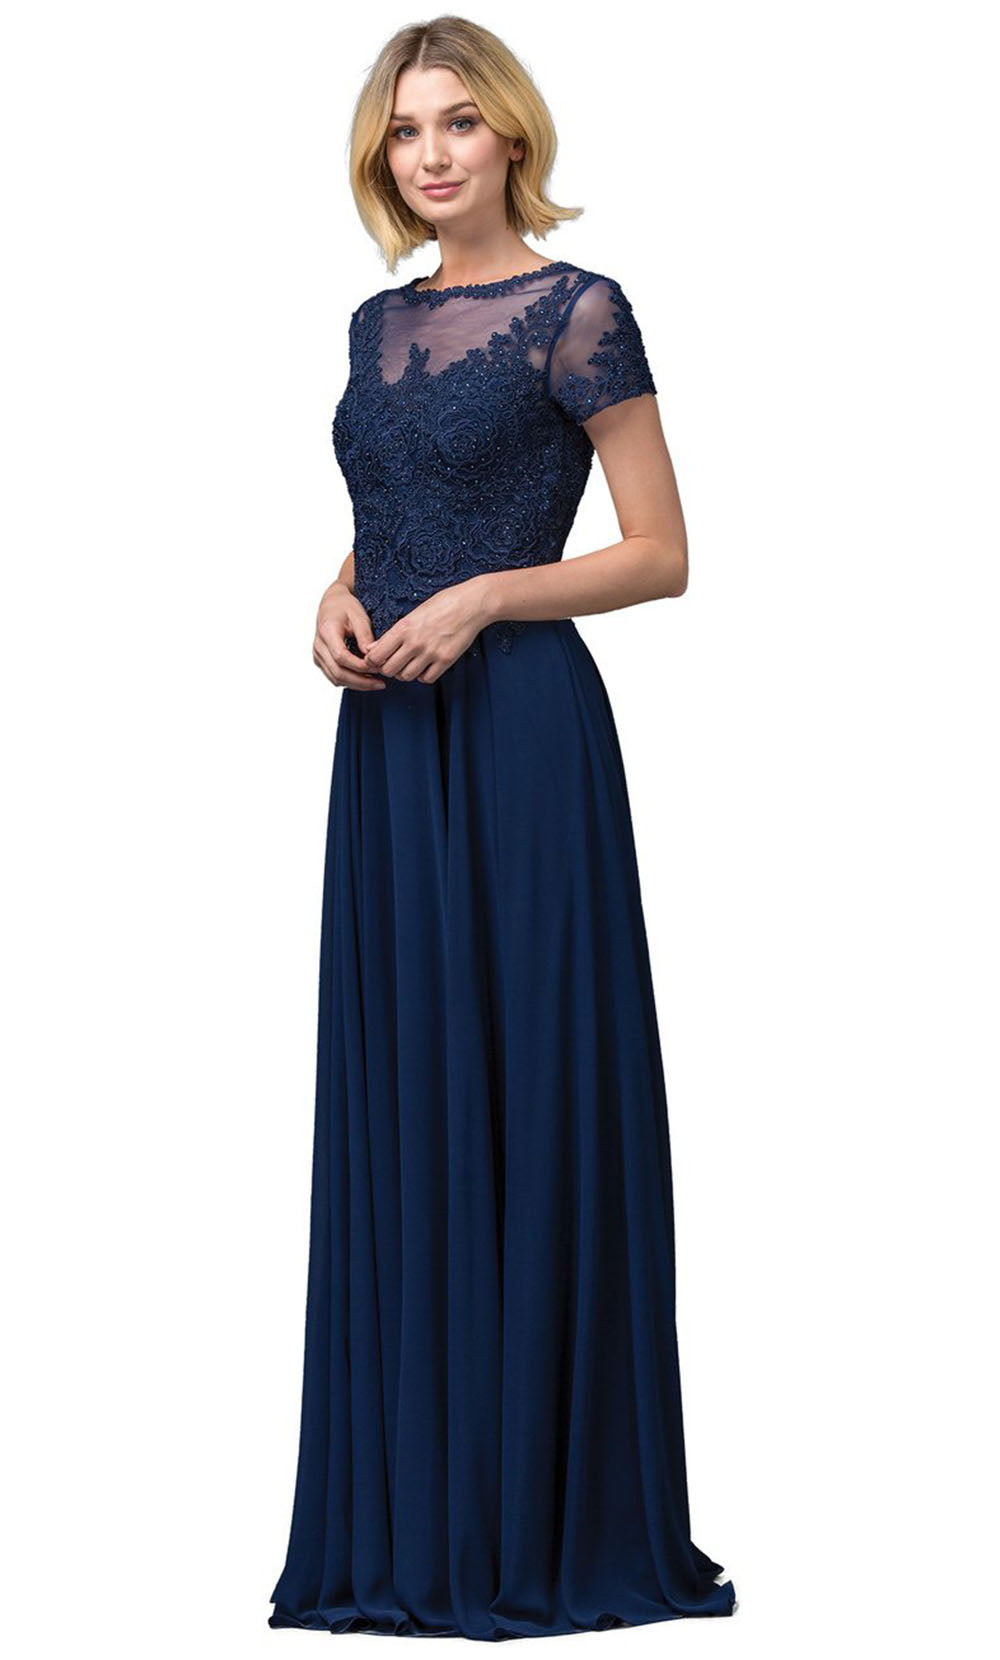 Dancing Queen - 2727 Embroidered Bateau Neck A-Line Gown In Blue